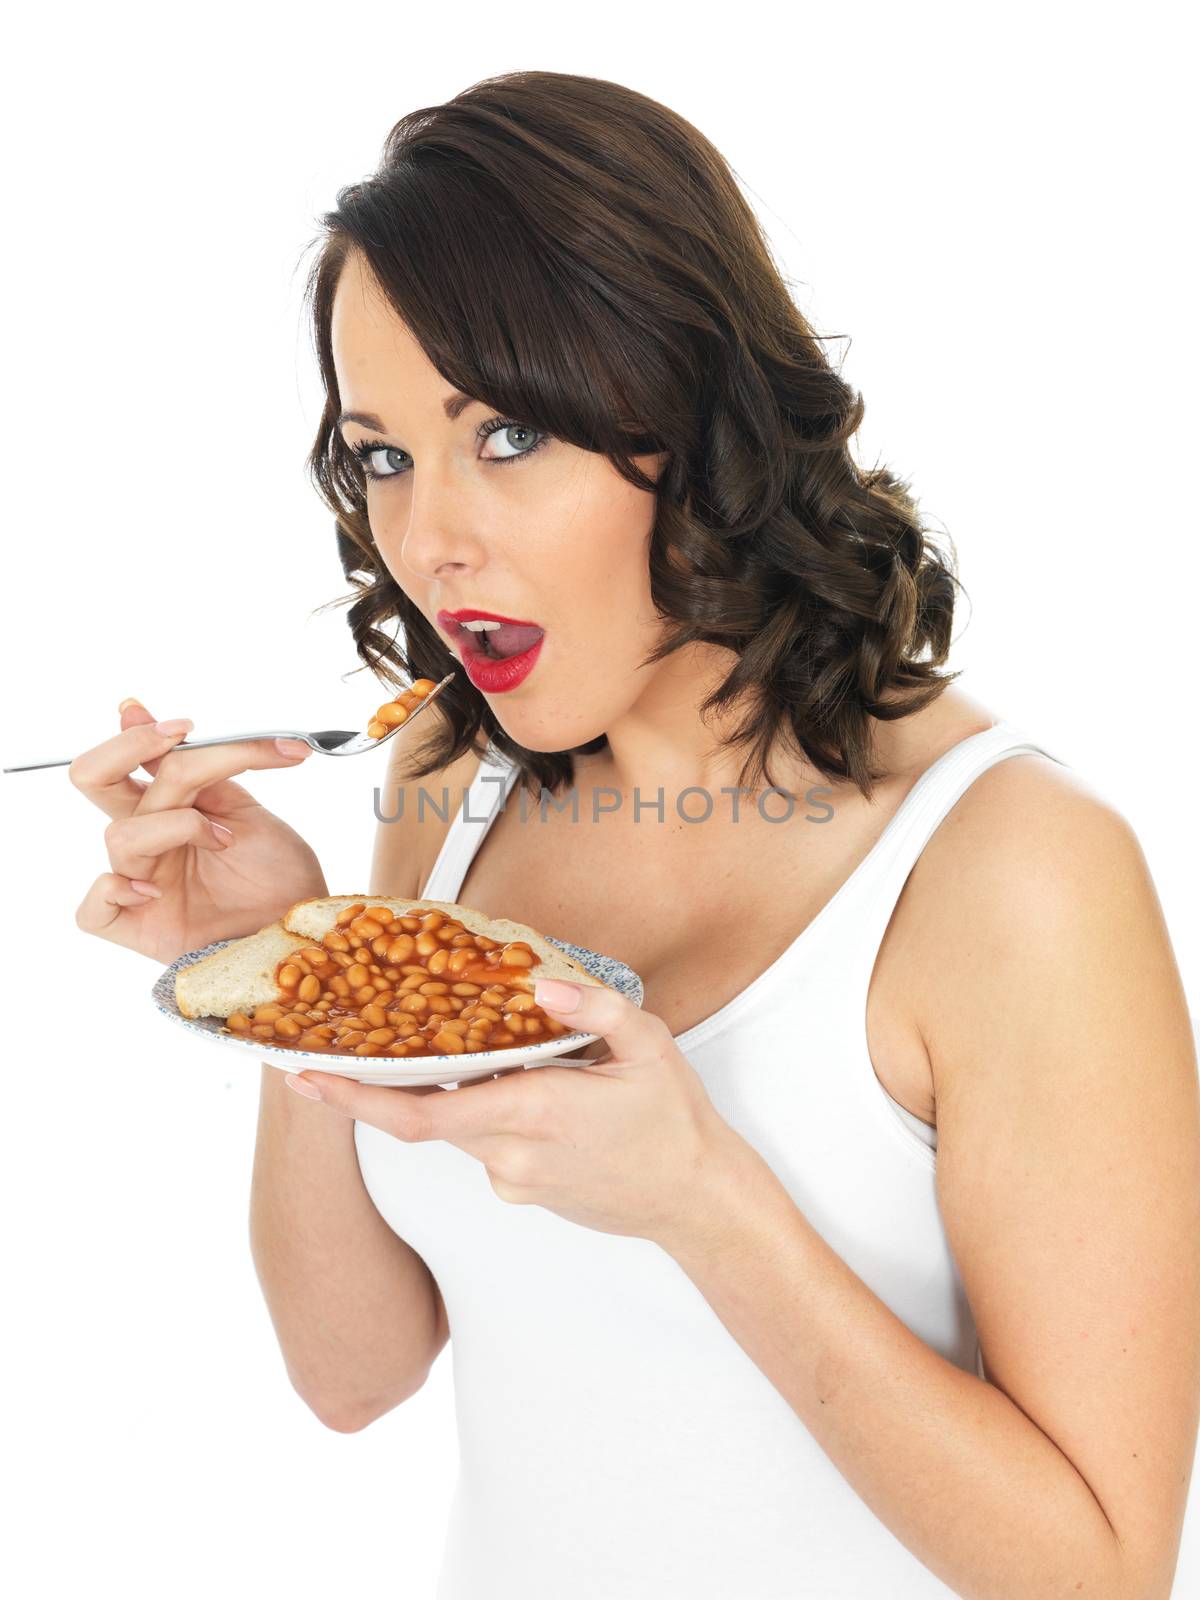 Healthy Young Woman Eating Baked Beans on Toast